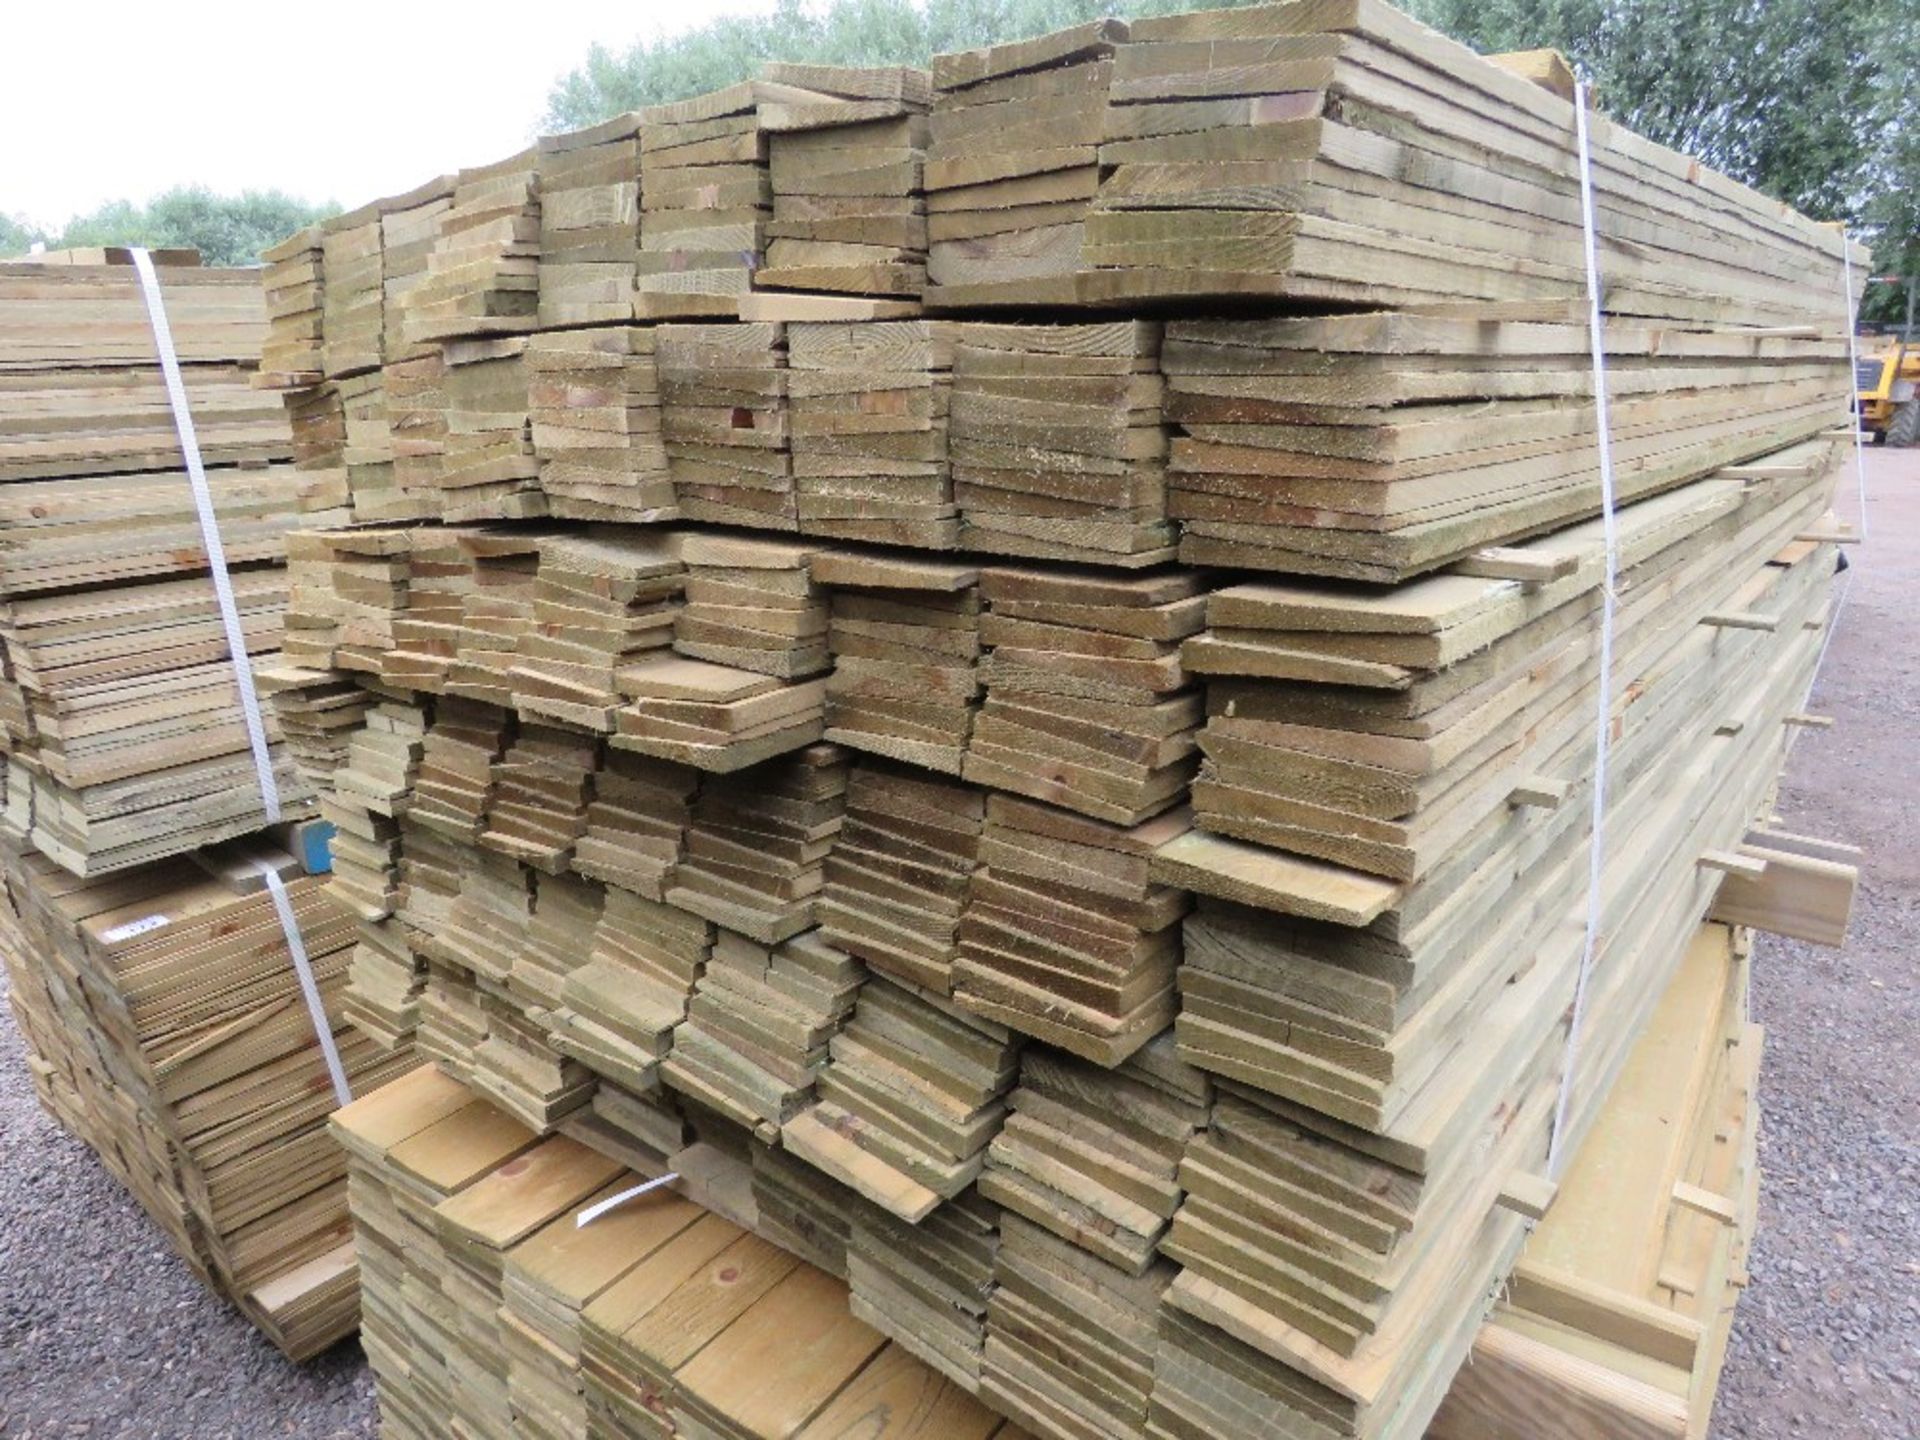 LARGE PACK OF PRESSURE TREATED FEATHER EDGE FENCE CLADDING TIMBER BOARDS: 1.65M LENGTH X 10CM WIDTH - Image 2 of 3